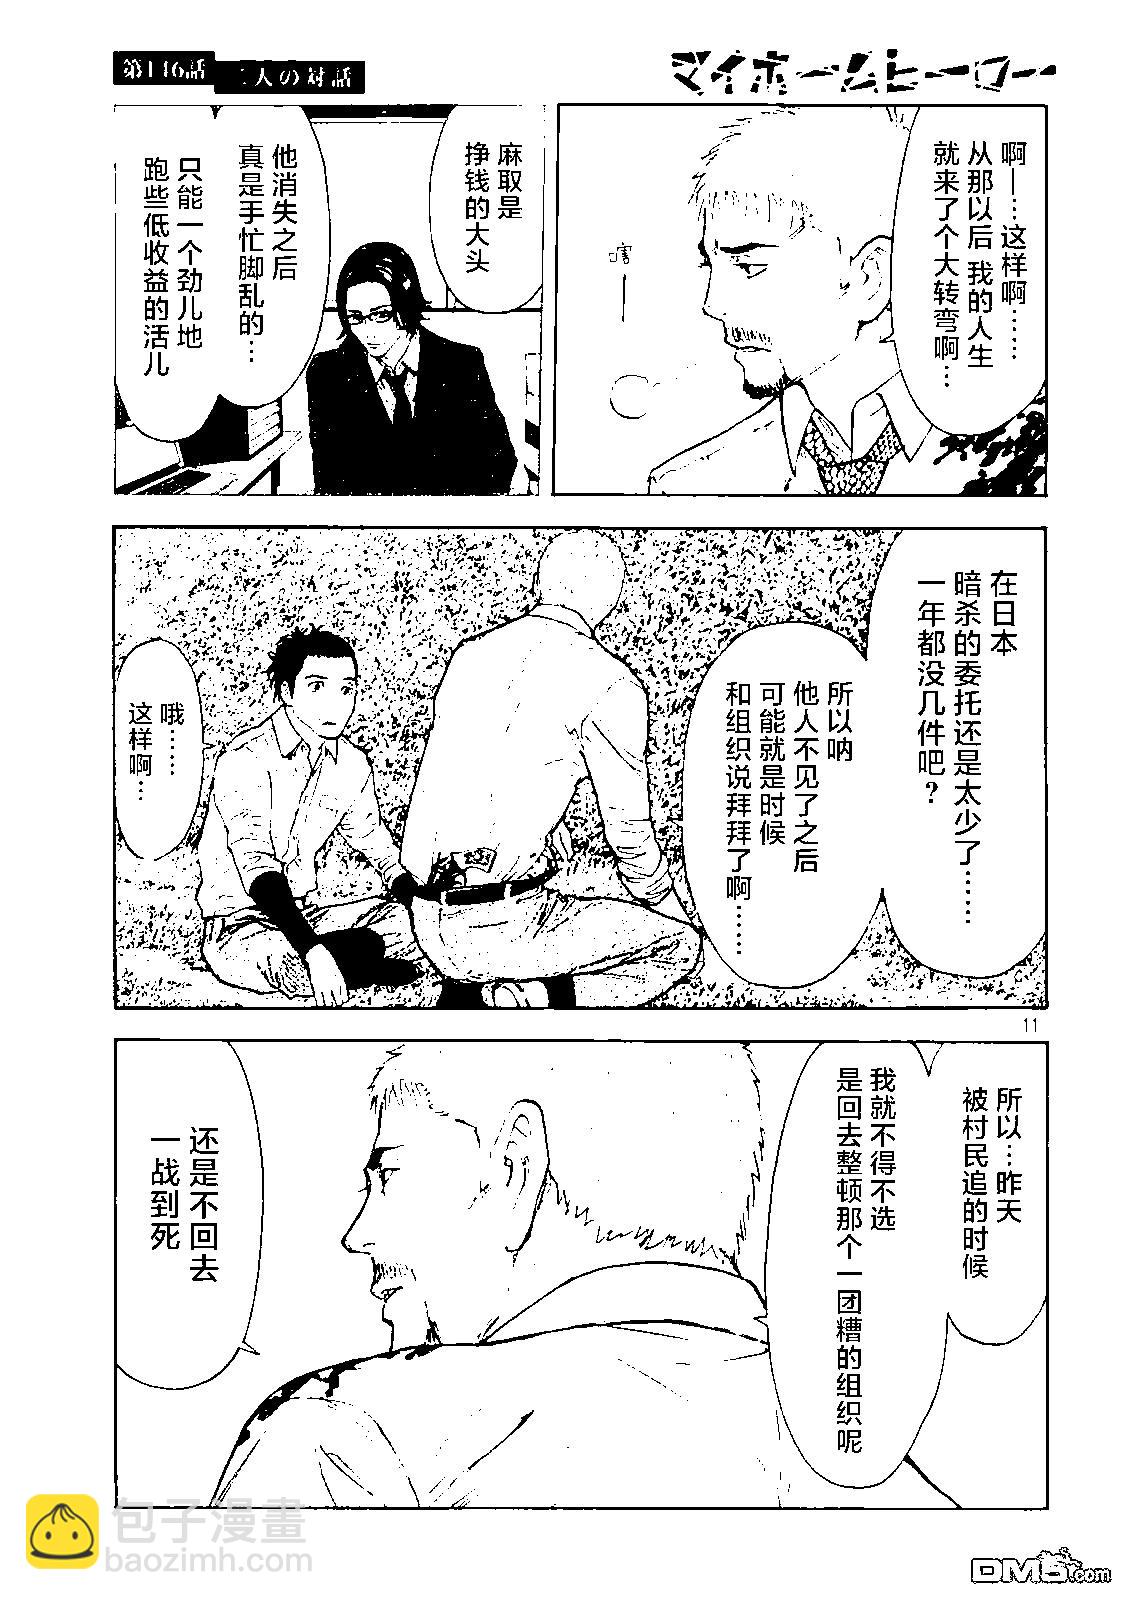 MY HOME HERO - 第146話 兩人的對話 - 1